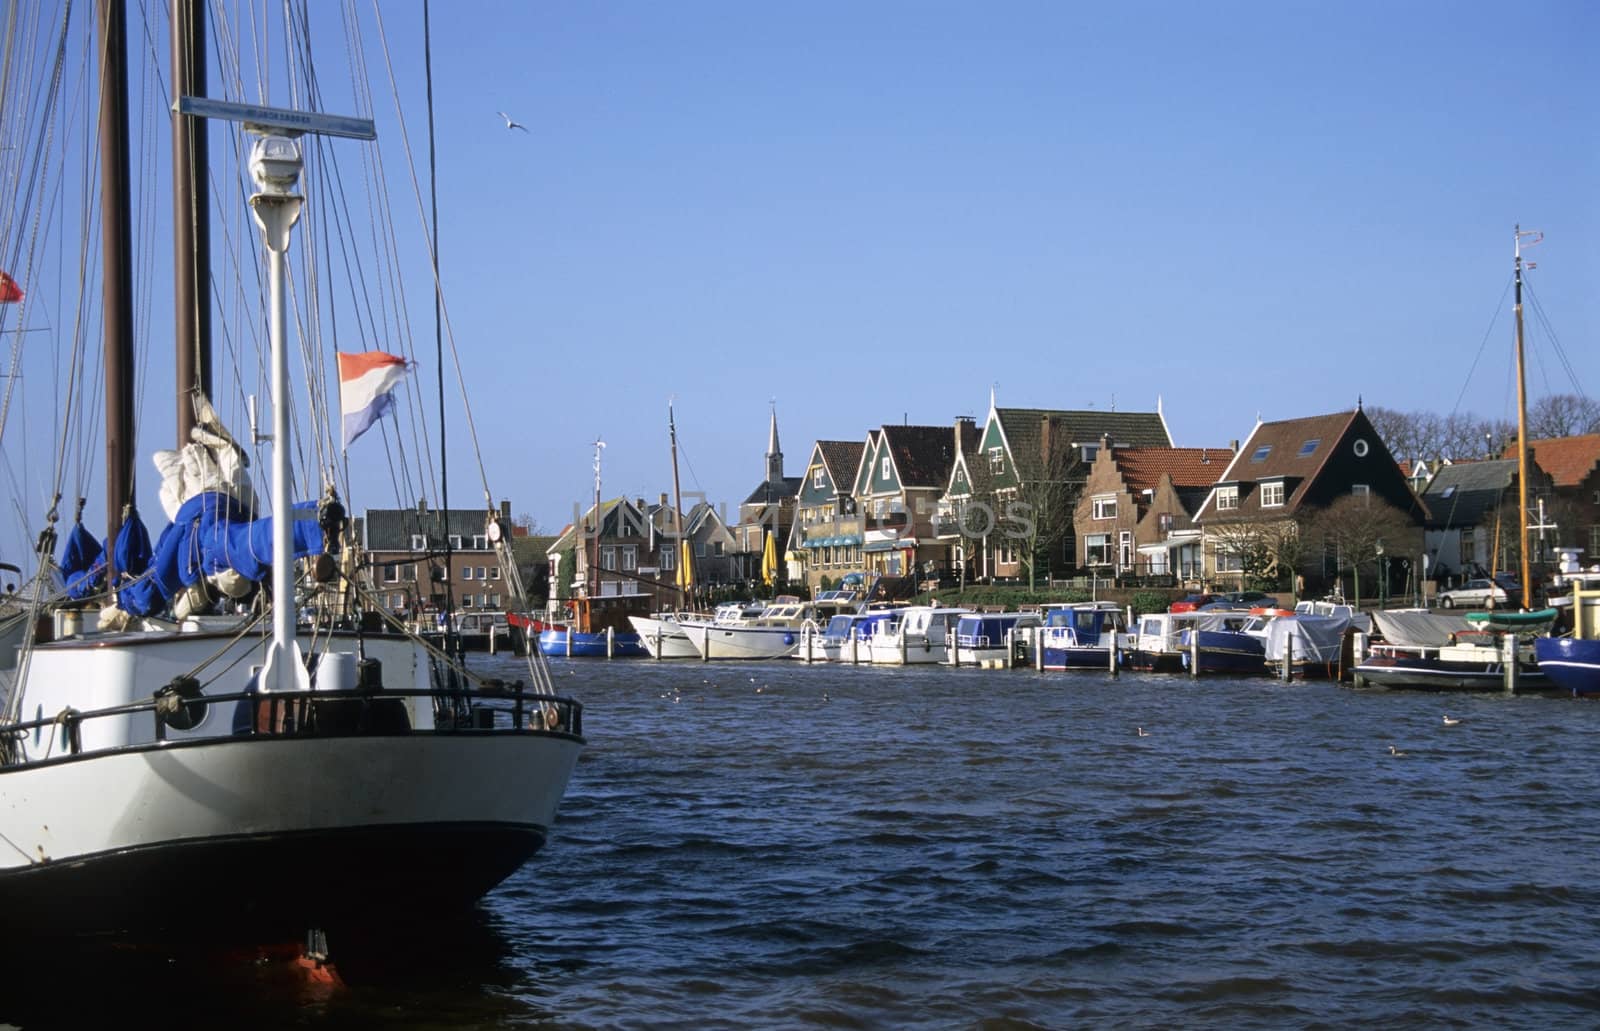 Urk Harbor with boats by ACMPhoto